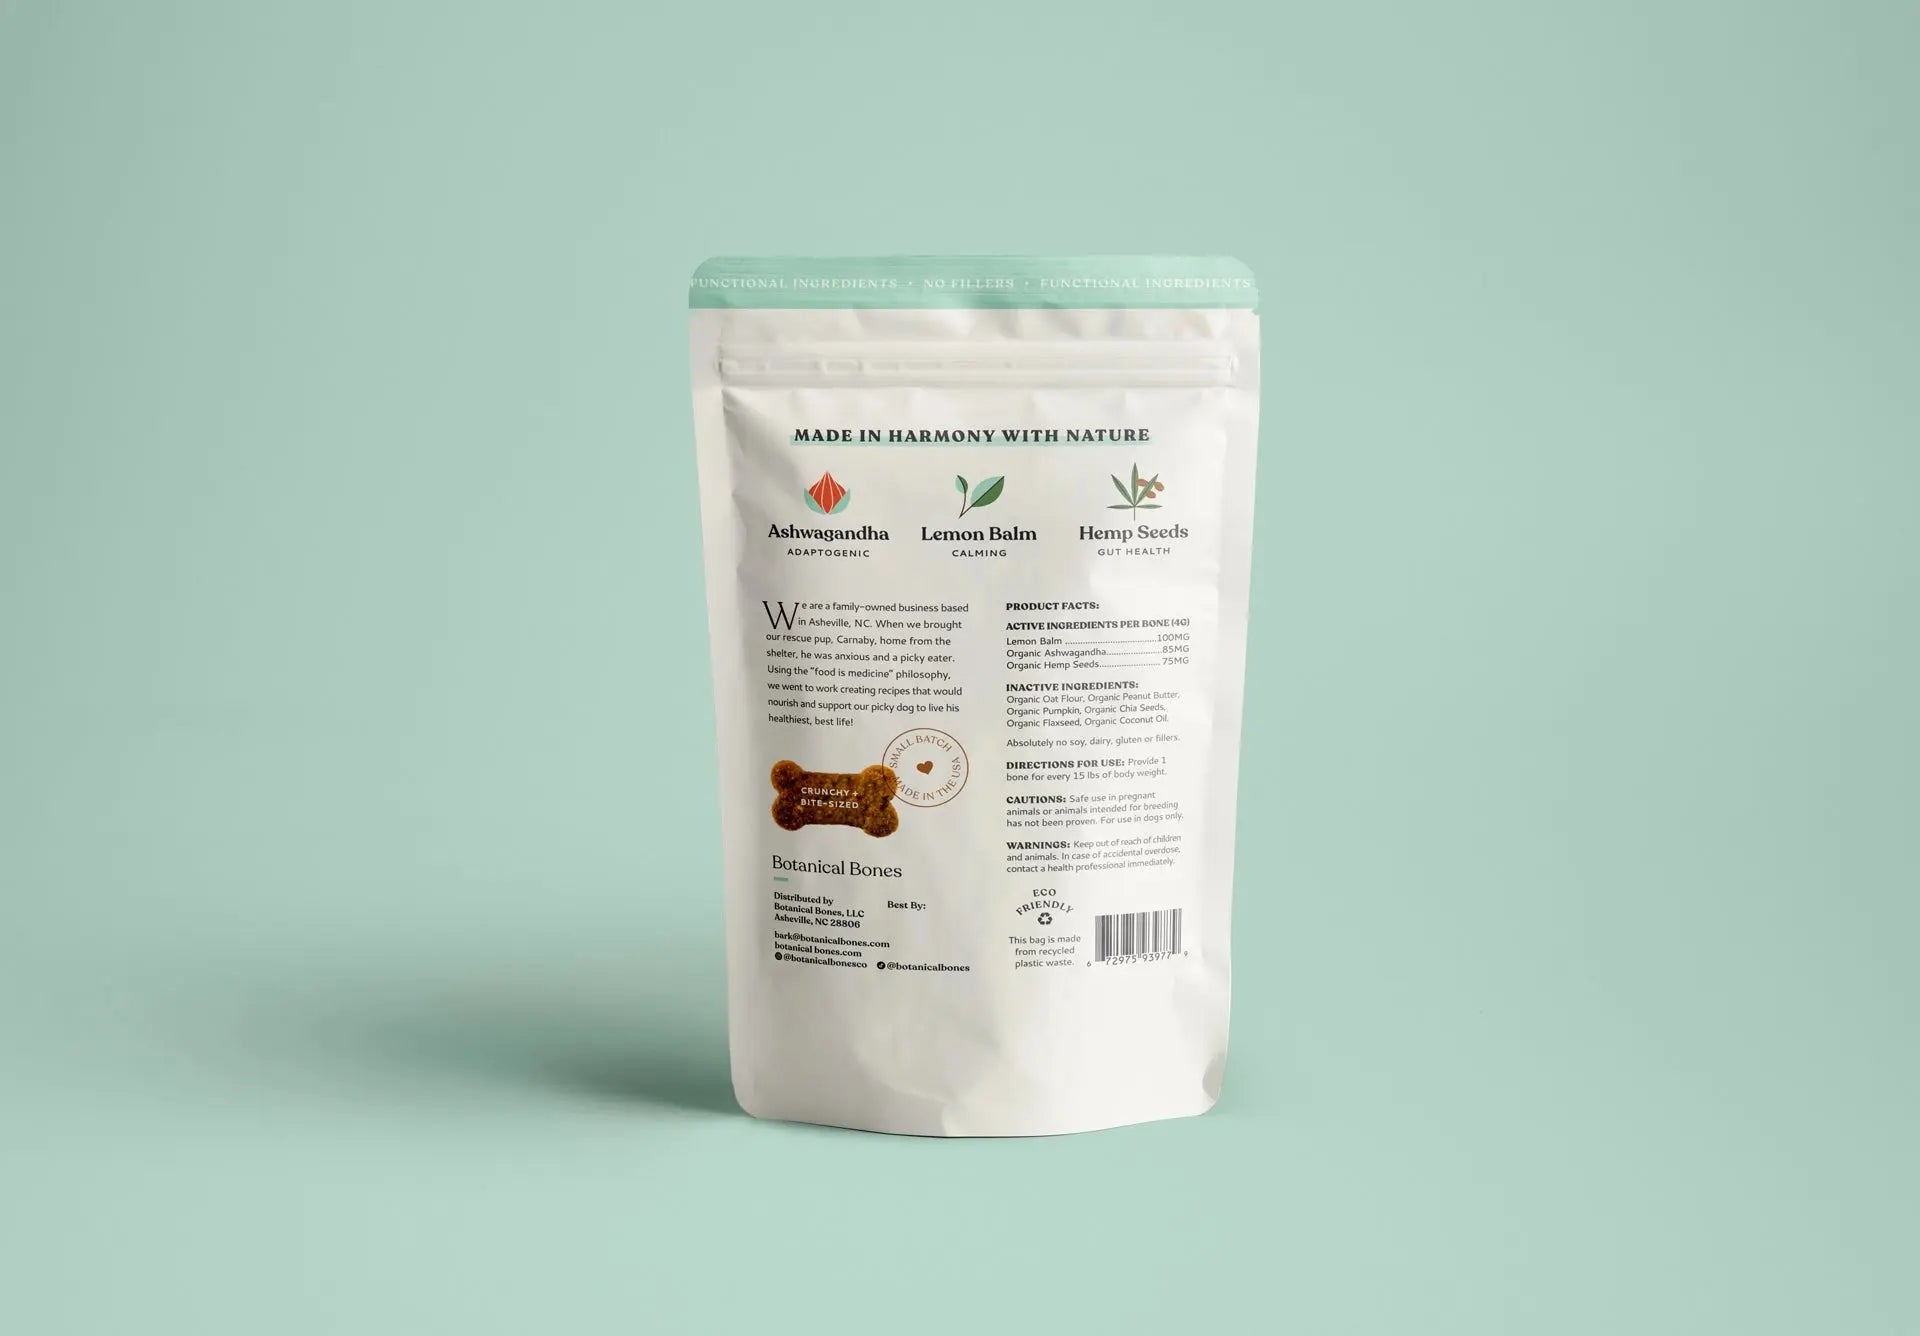 Inner Glow Superfood Dog Treats - Fluffy Collective